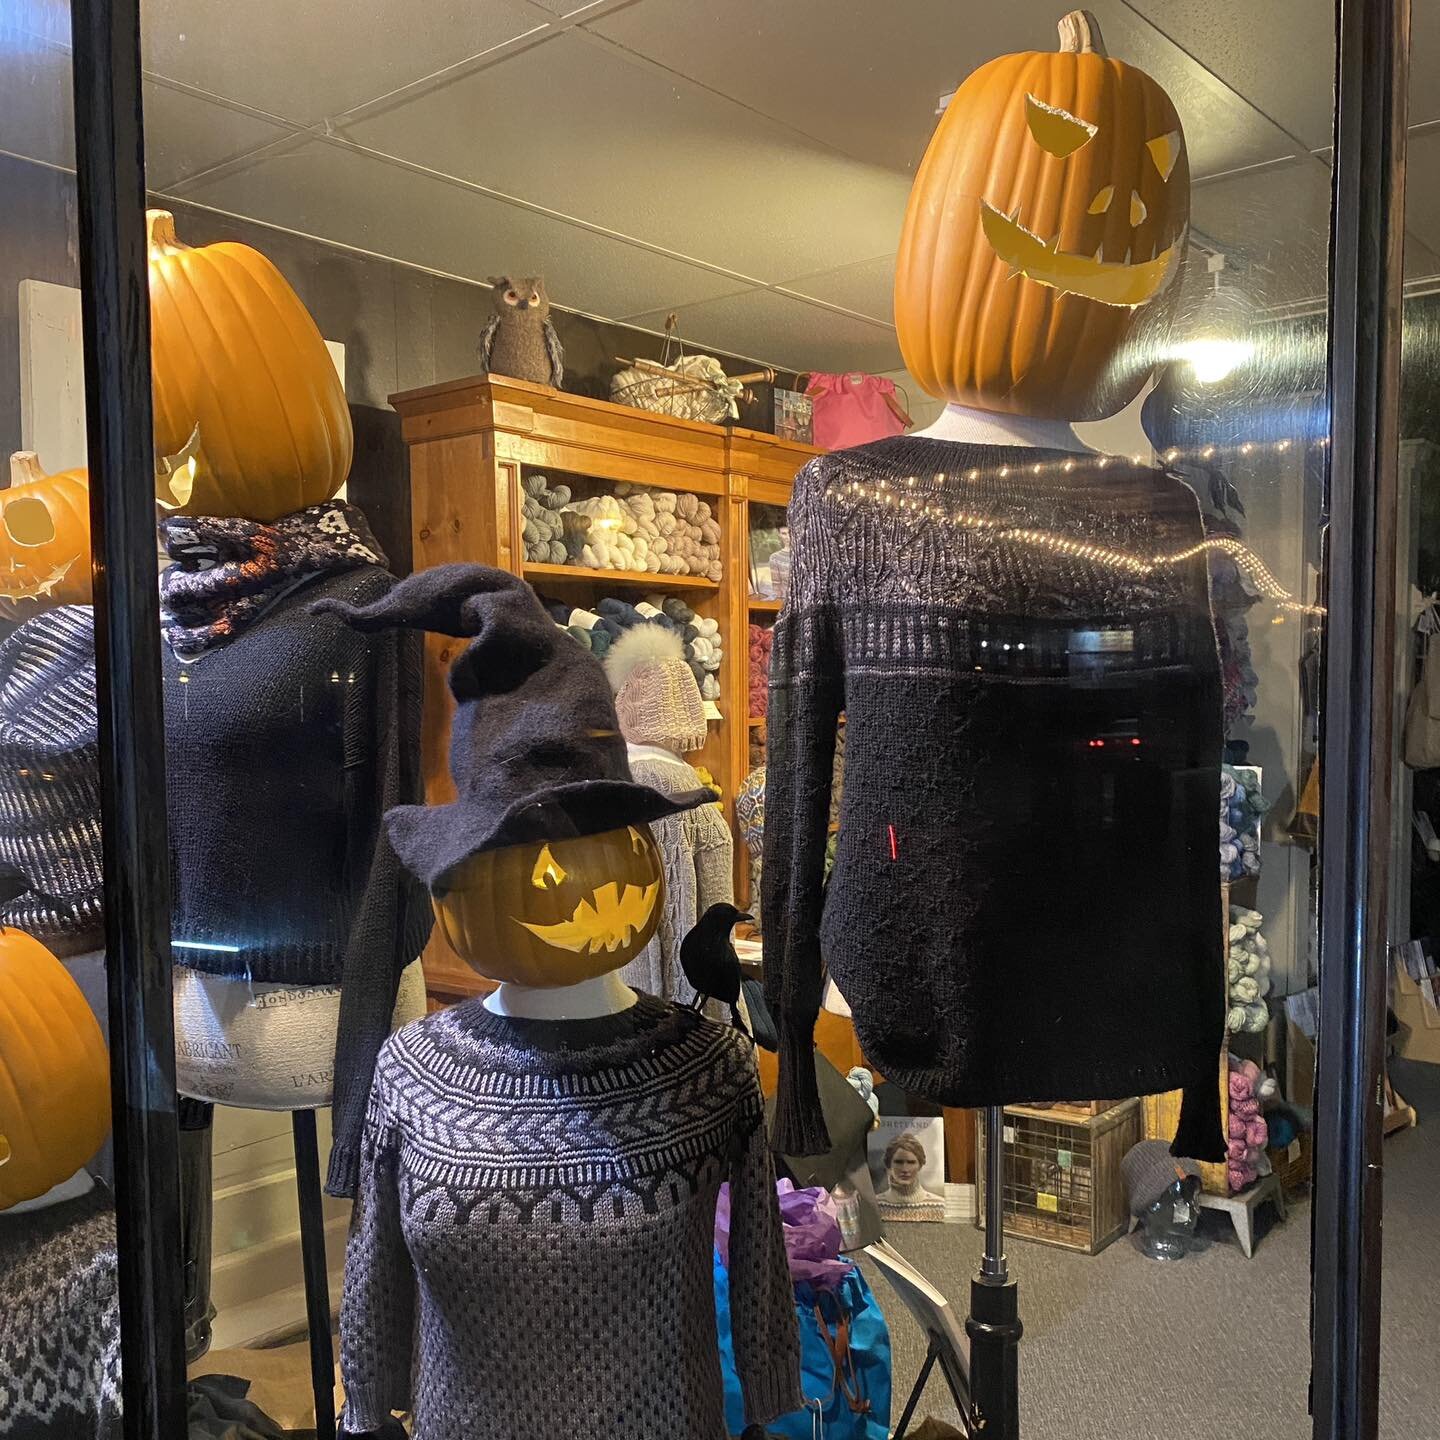 Some very well dressed and cozy warm jack-o-lanterns are visiting our fall window! And speaking of well dressed, the Japanese maples are wearing their glorious autumn best. Bring on the hot cider!

Thank you @julieanna27 for the window idea and all t